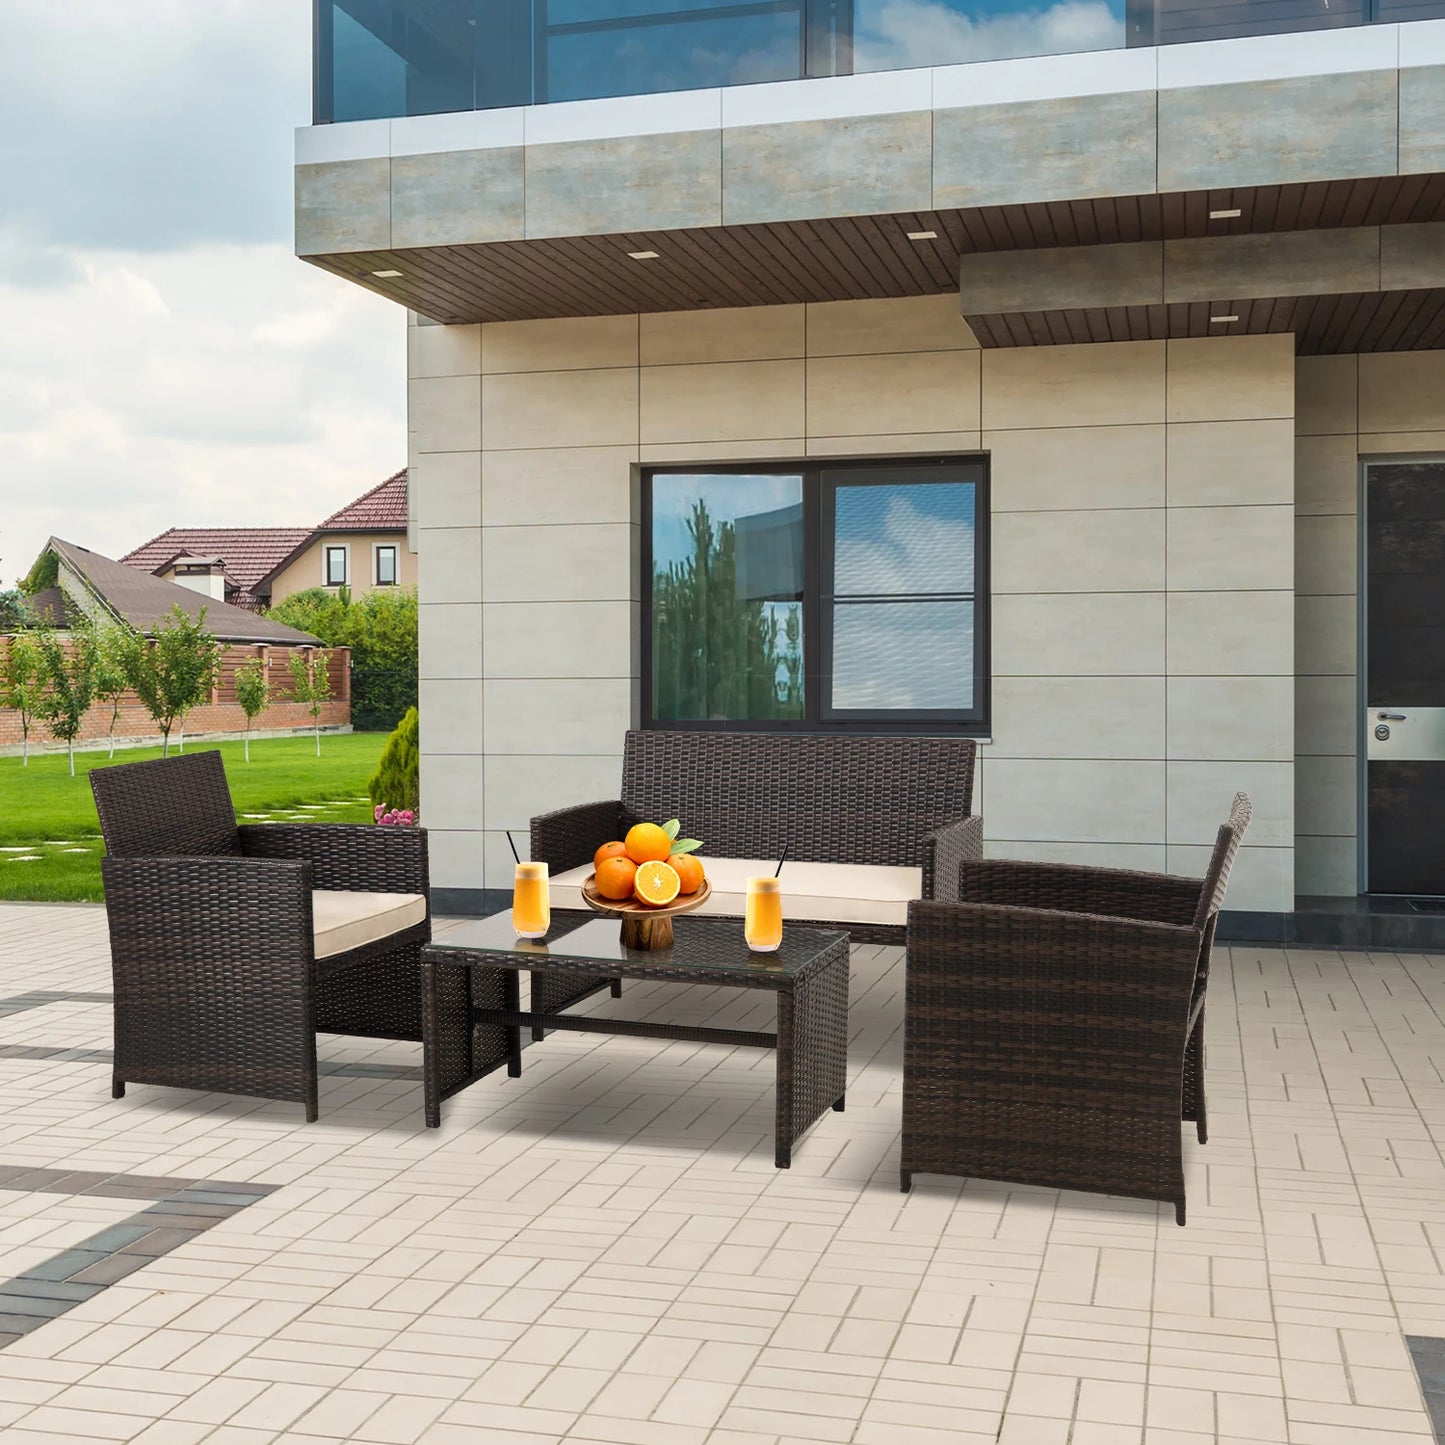 4 Pc Outdoor Wicker Furniture Set with Soft Cushions and Glass Tabletop